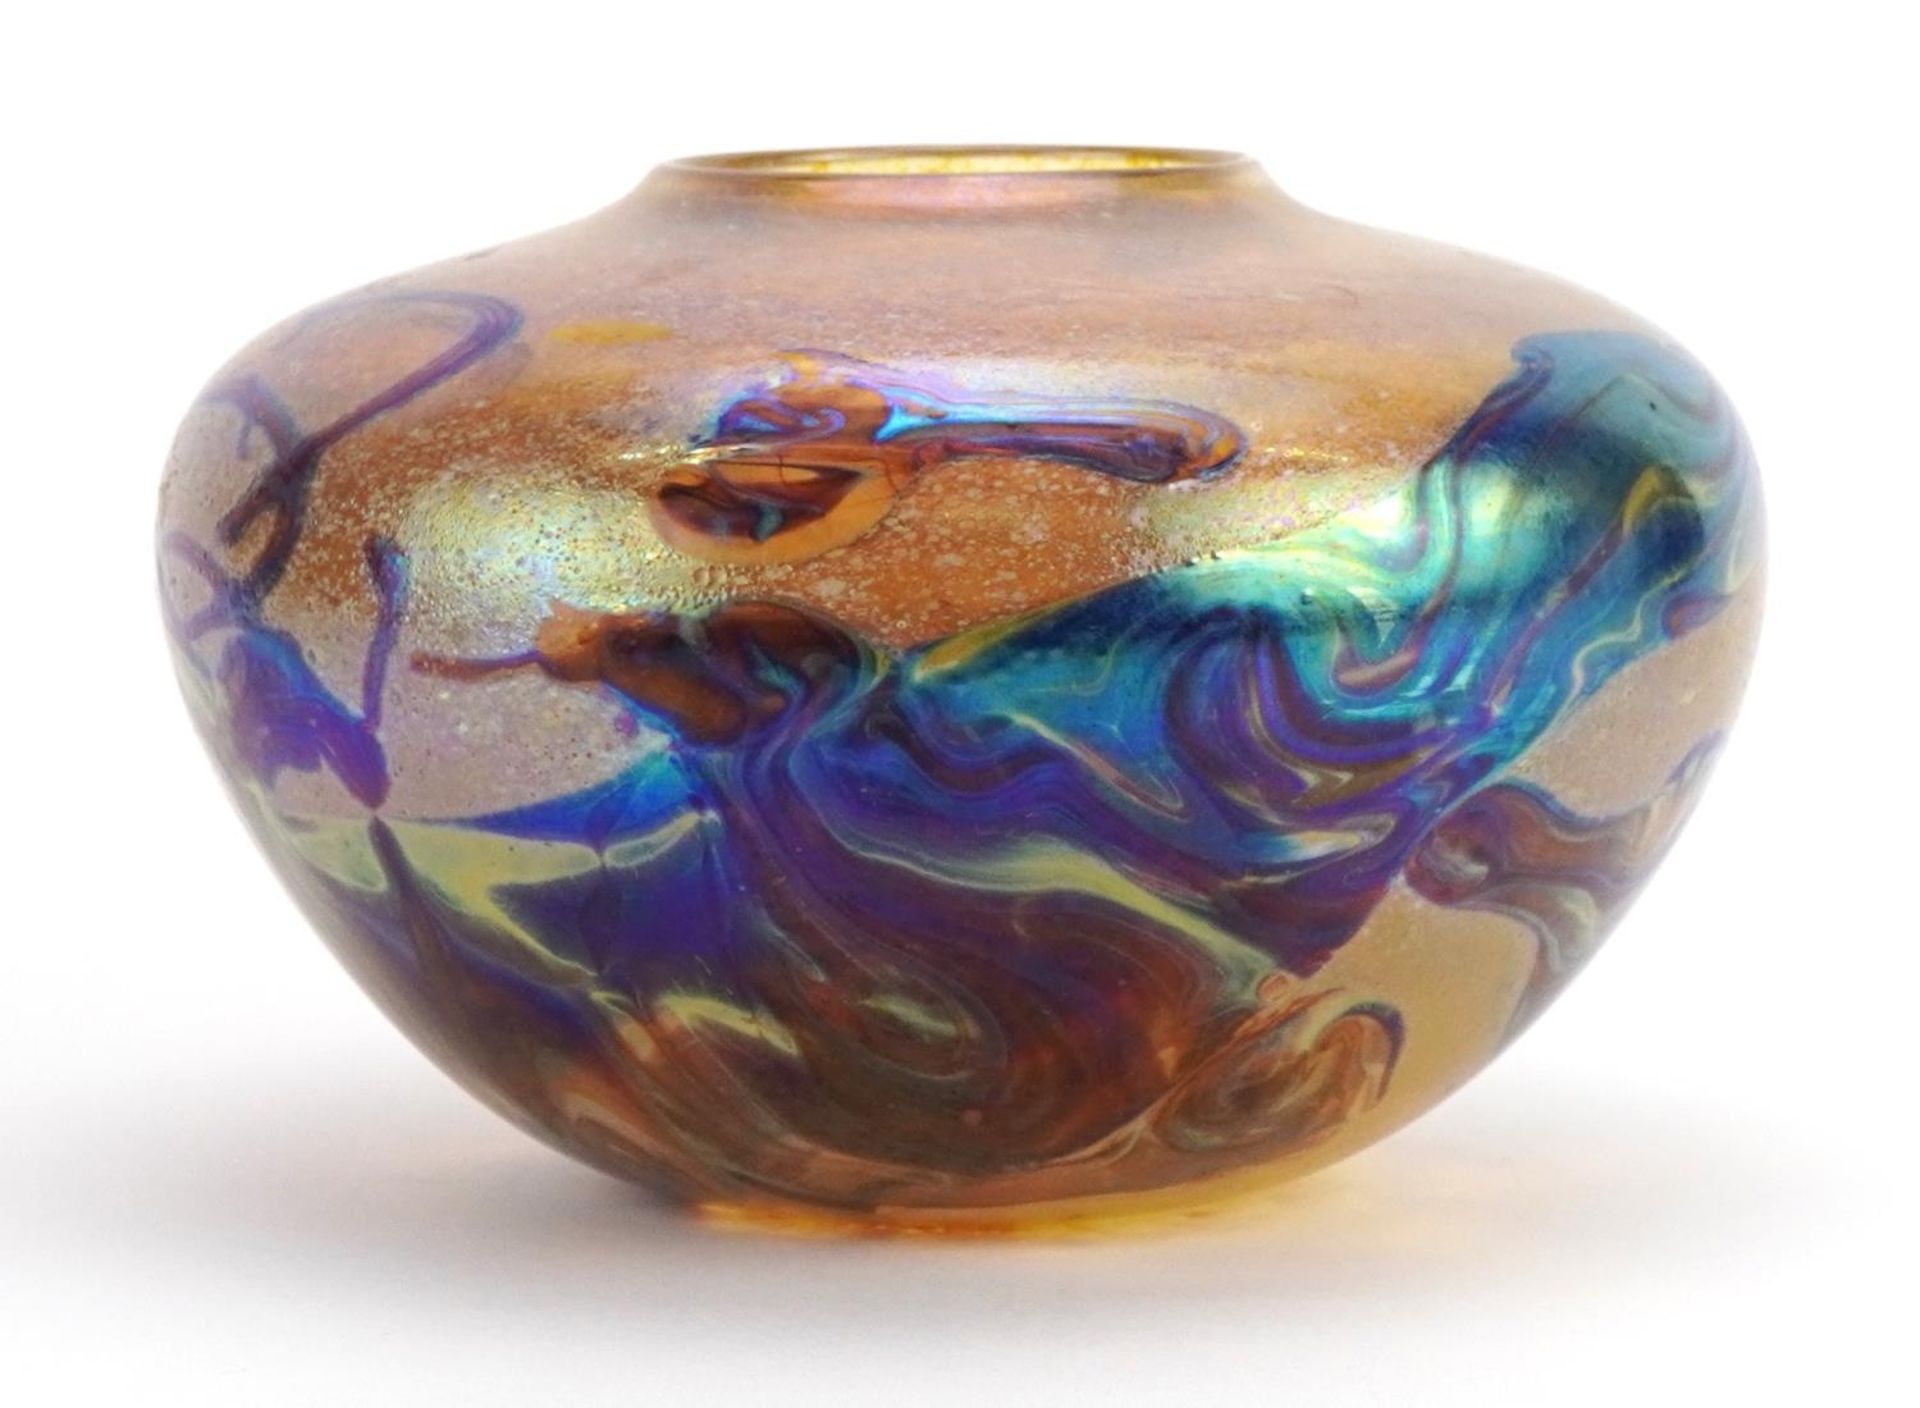 Siddy Langley, large iridescent art glass vase, etched Siddy Langley 1998 to the base, 19cm in